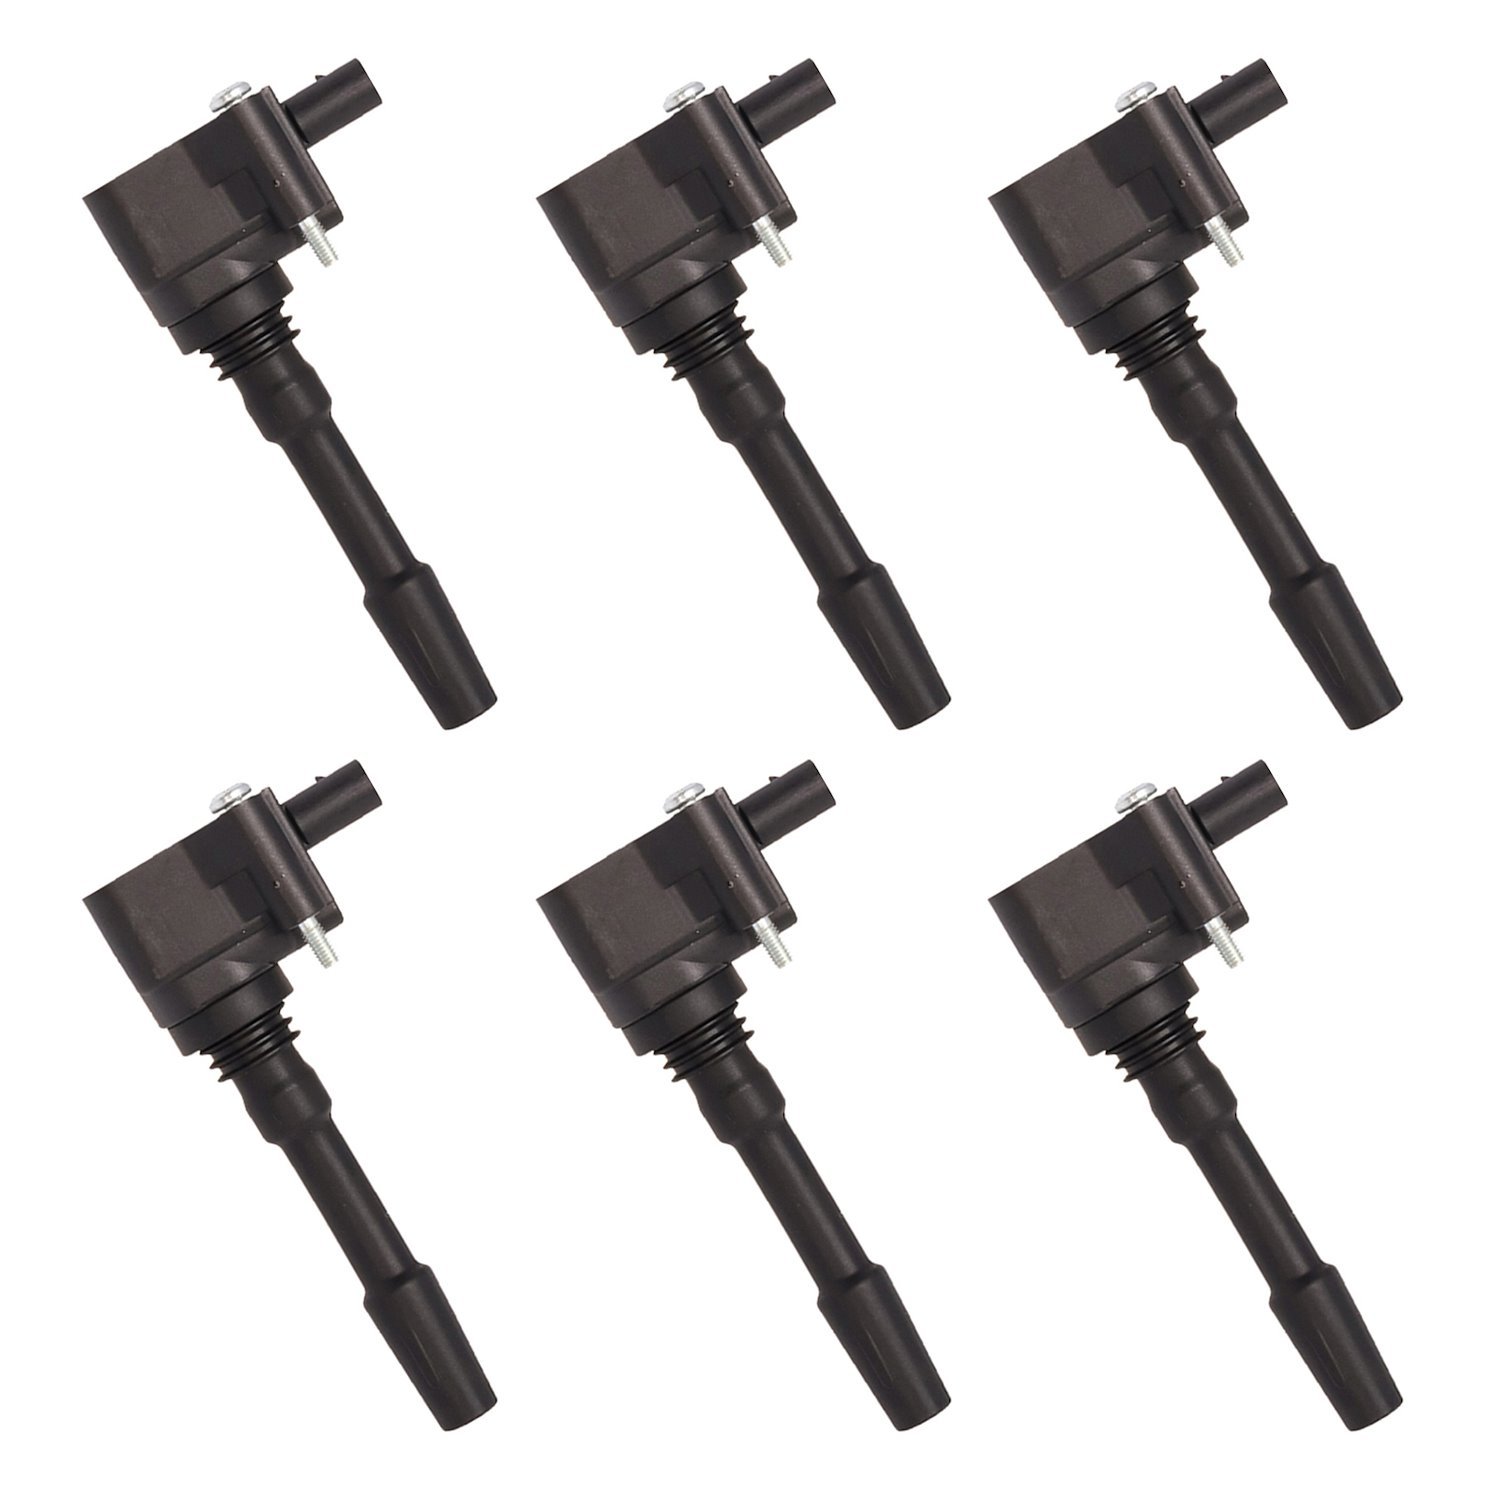 OE Replacement Ignition Coils for Cayenne, Macan, Panamera